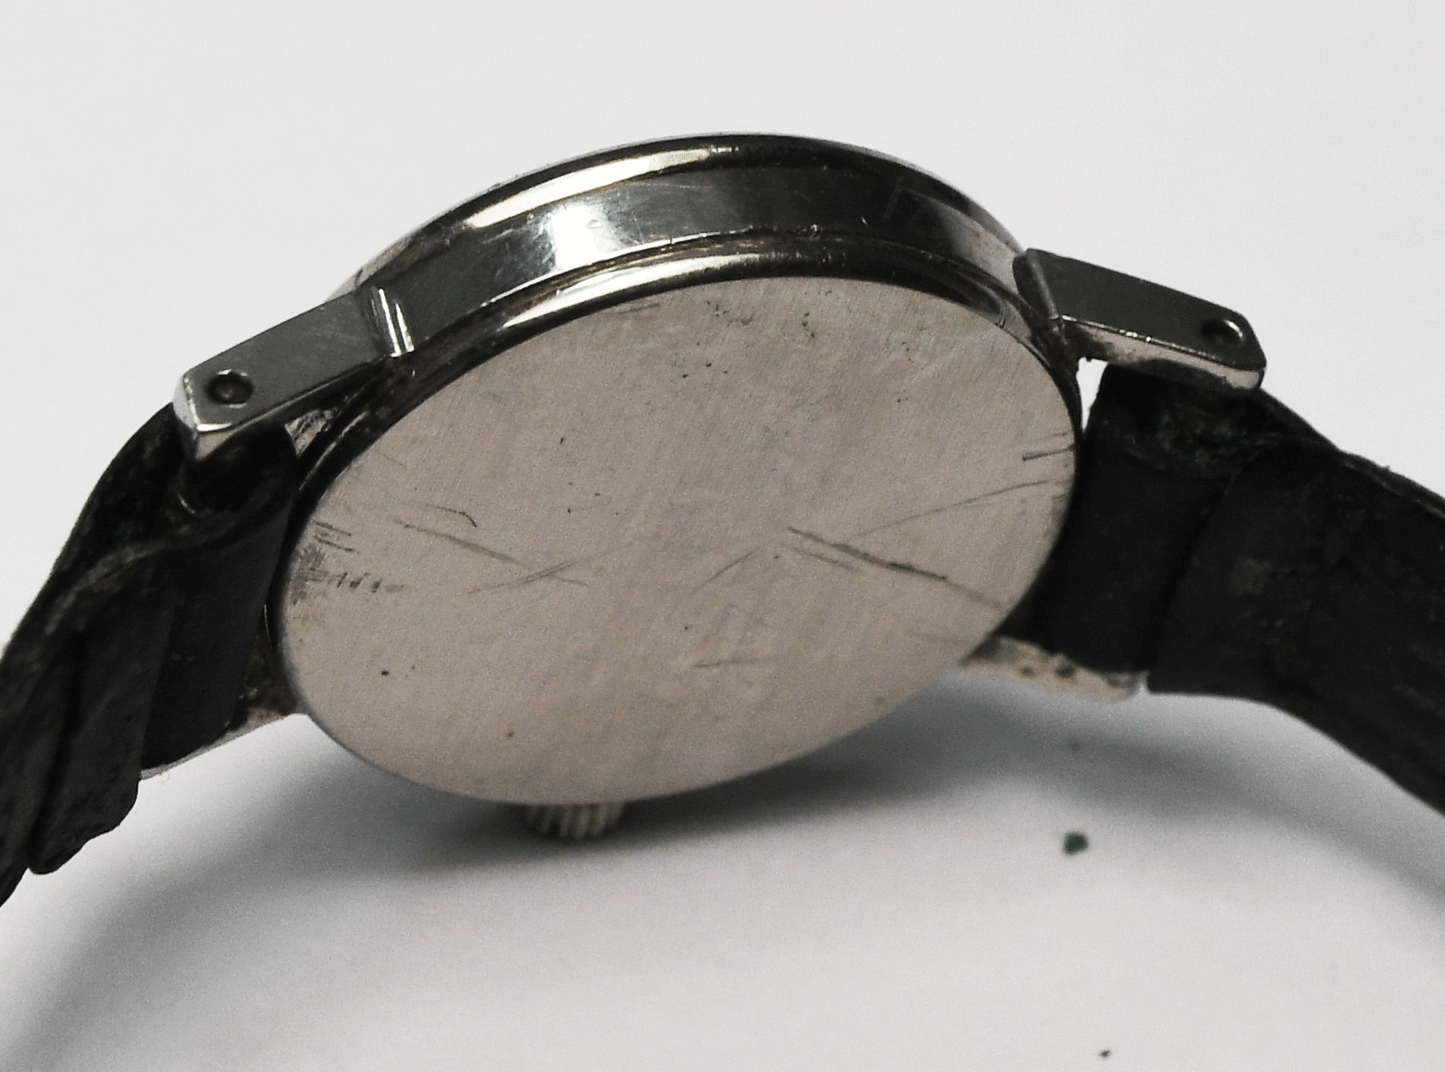 1968 Women's Omega 20mm Stainless Steel Wristwatch 511.213 cal. 620